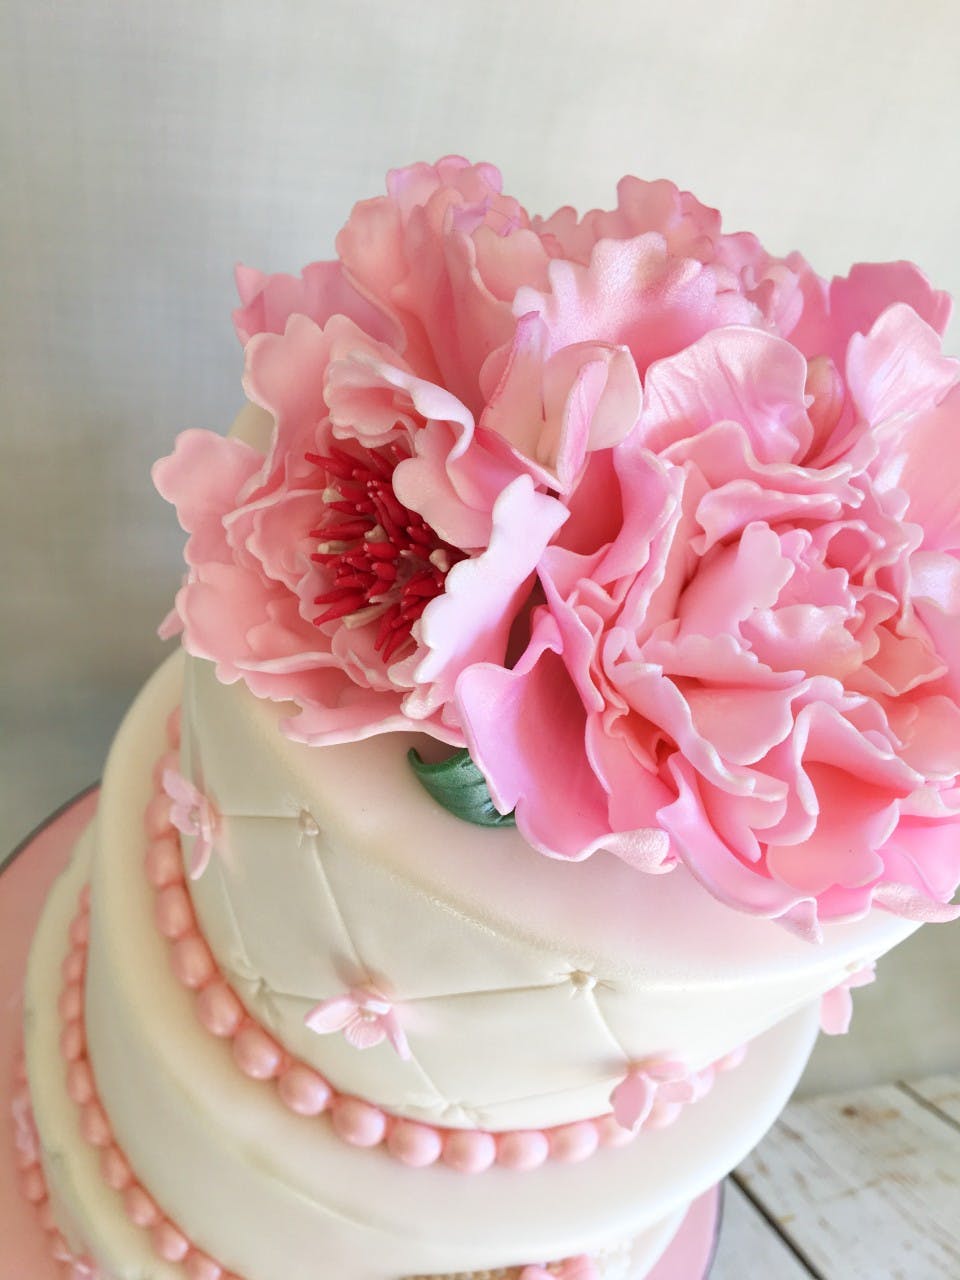 a pink flower sits in a piece of cake on a table